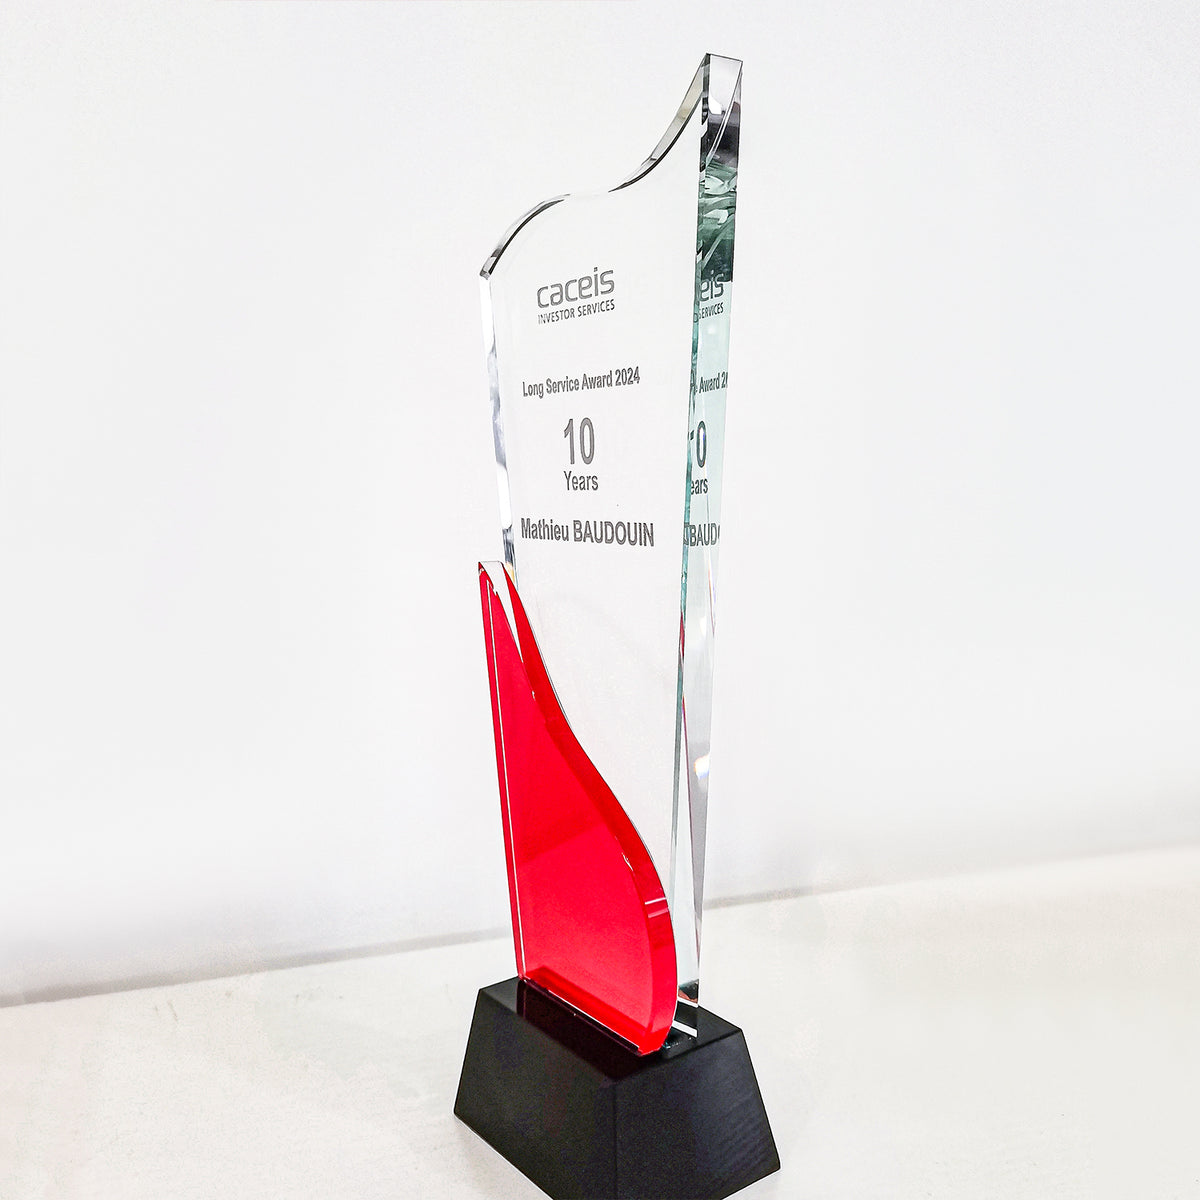 [Case Studies]caceis | Achitectural Style Crystal Trophy